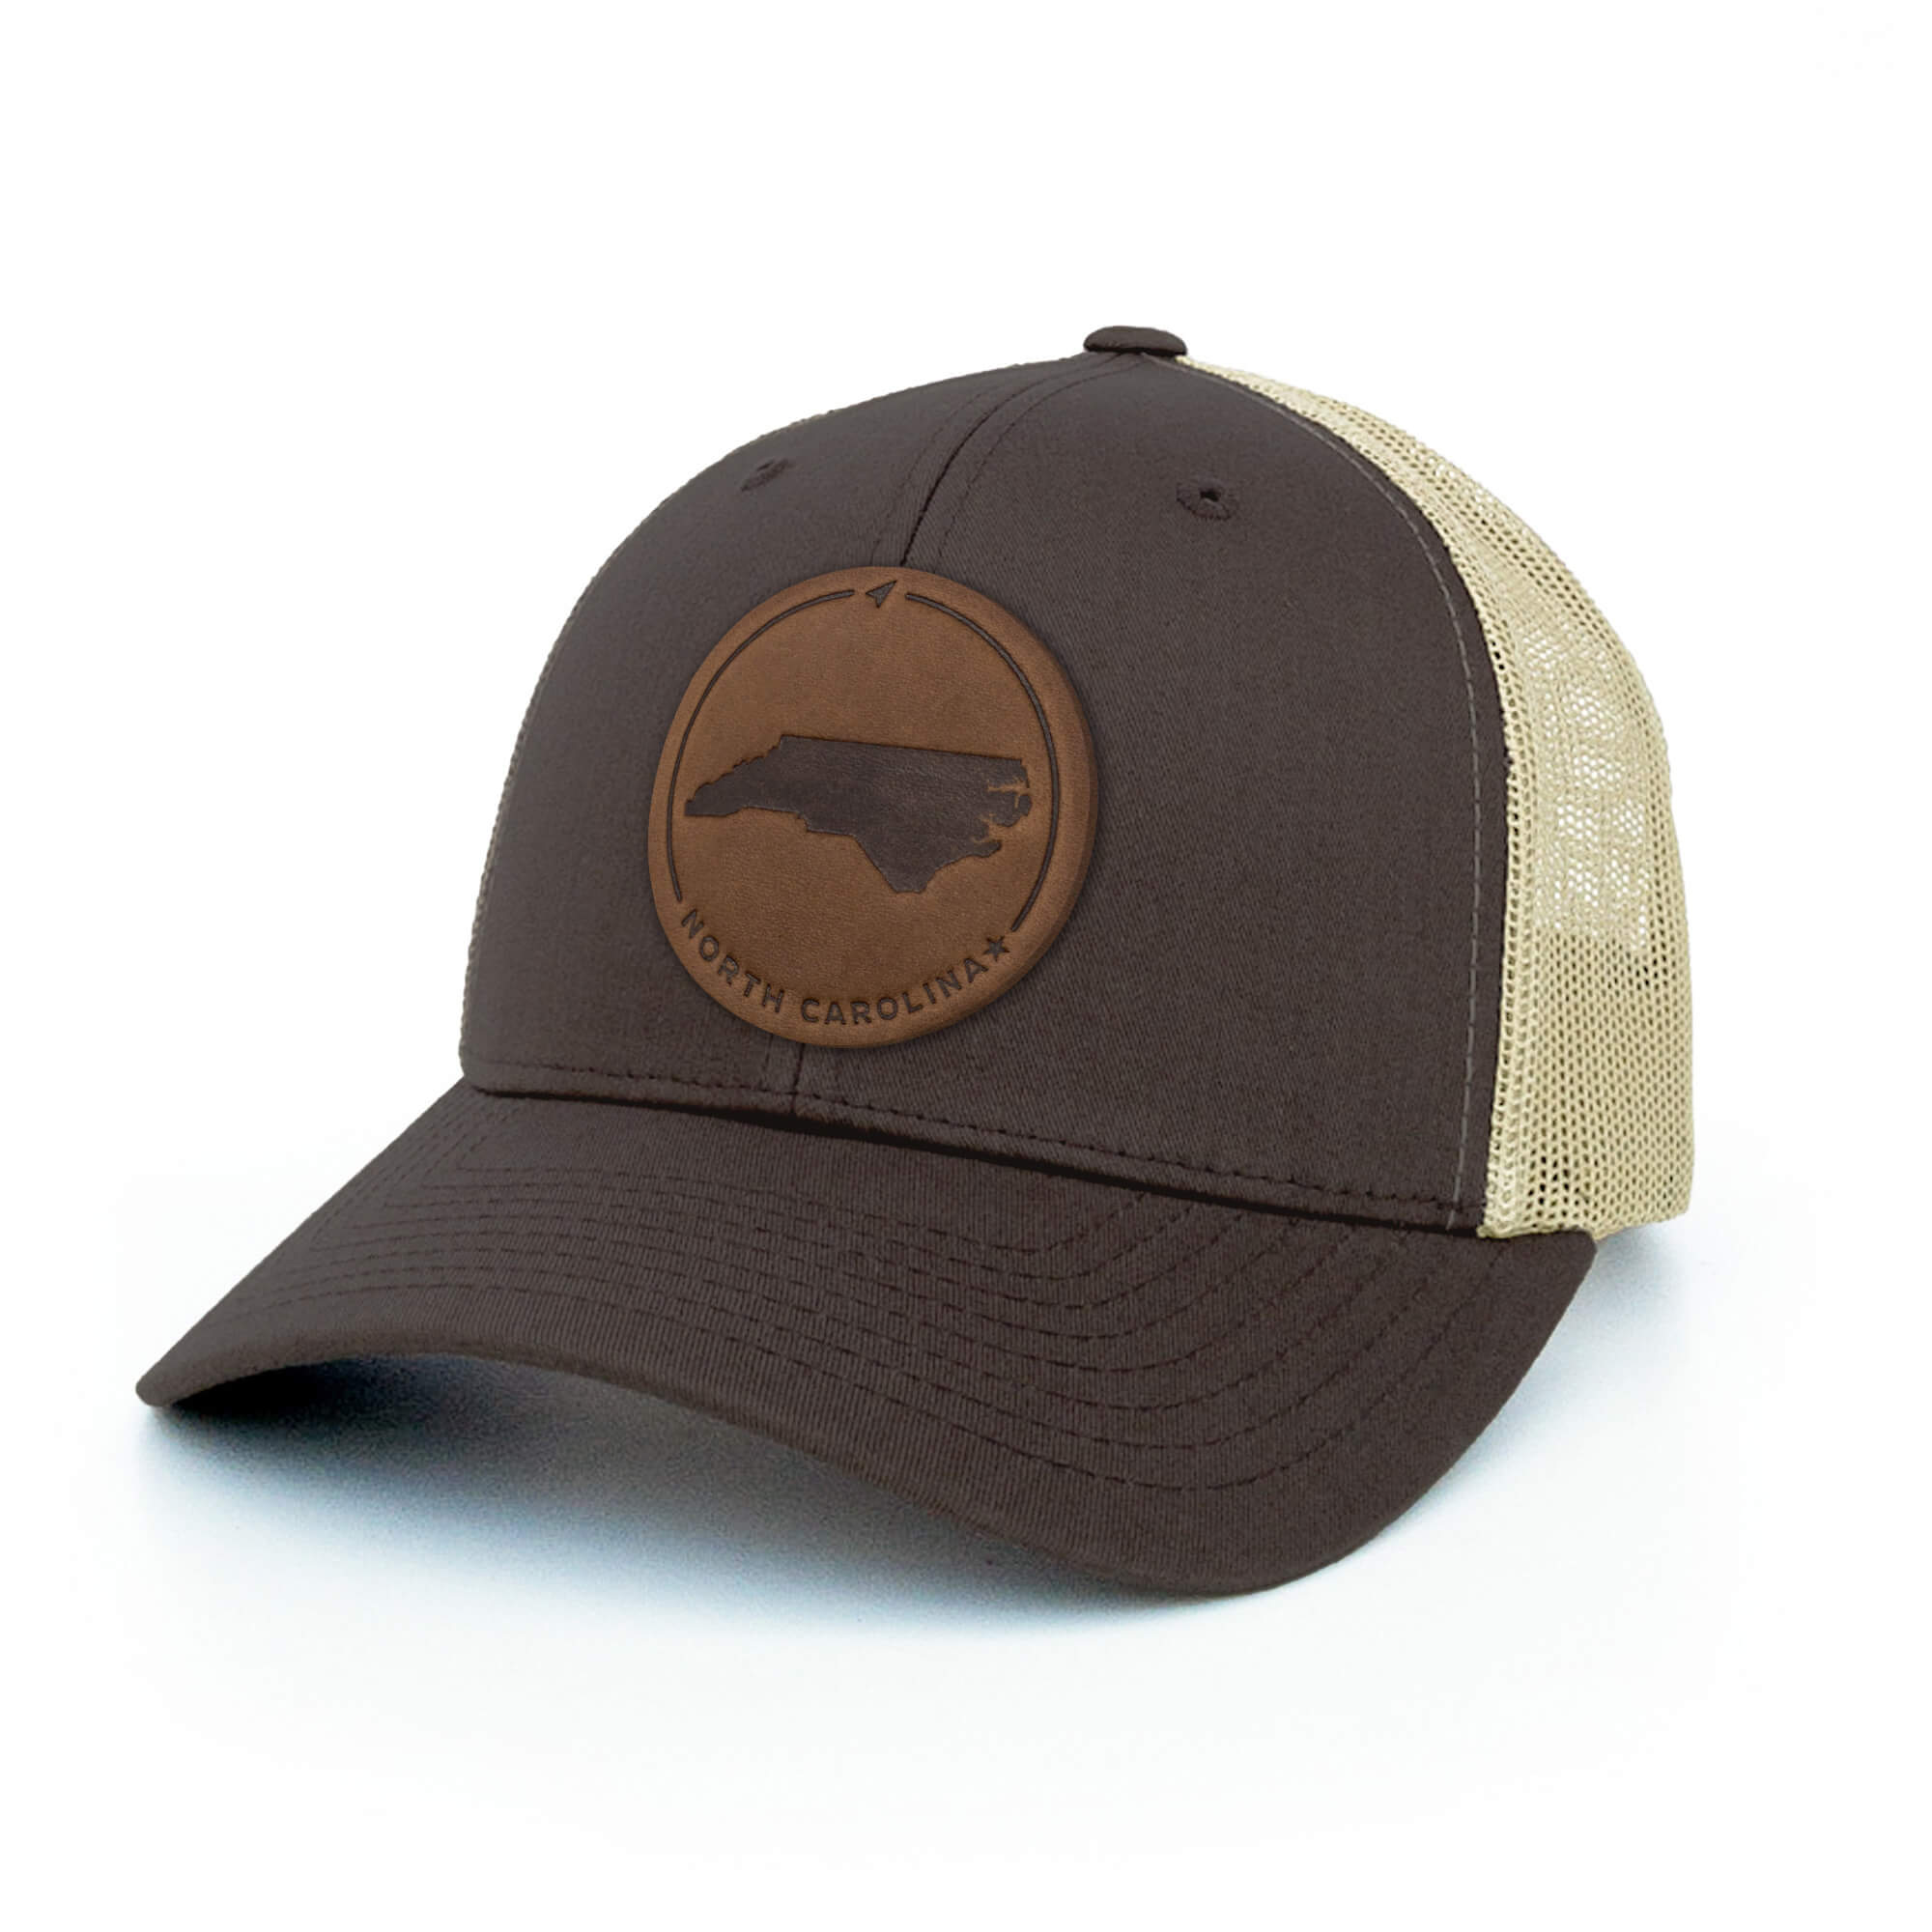 Brown and khaki trucker hat with full-grain leather patch of North Carolina | BLACK-003-005, CHARC-003-005, NAVY-003-005, HGREY-003-005, MOSS-003-005, BROWN-003-005